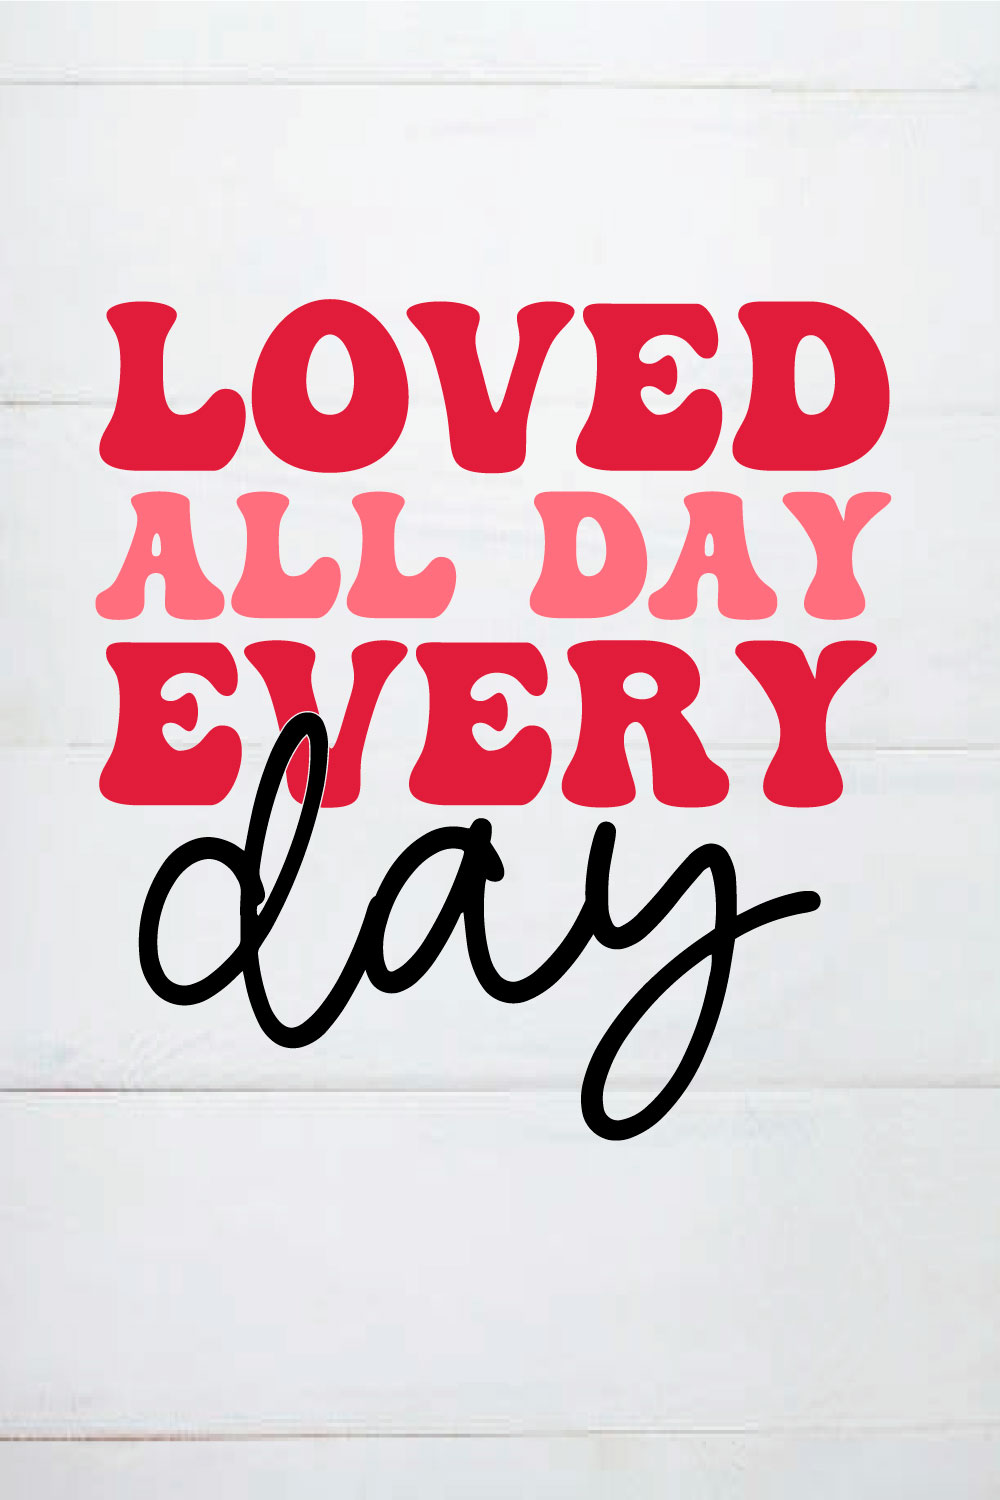 loved all day every day retro pinterest preview image.